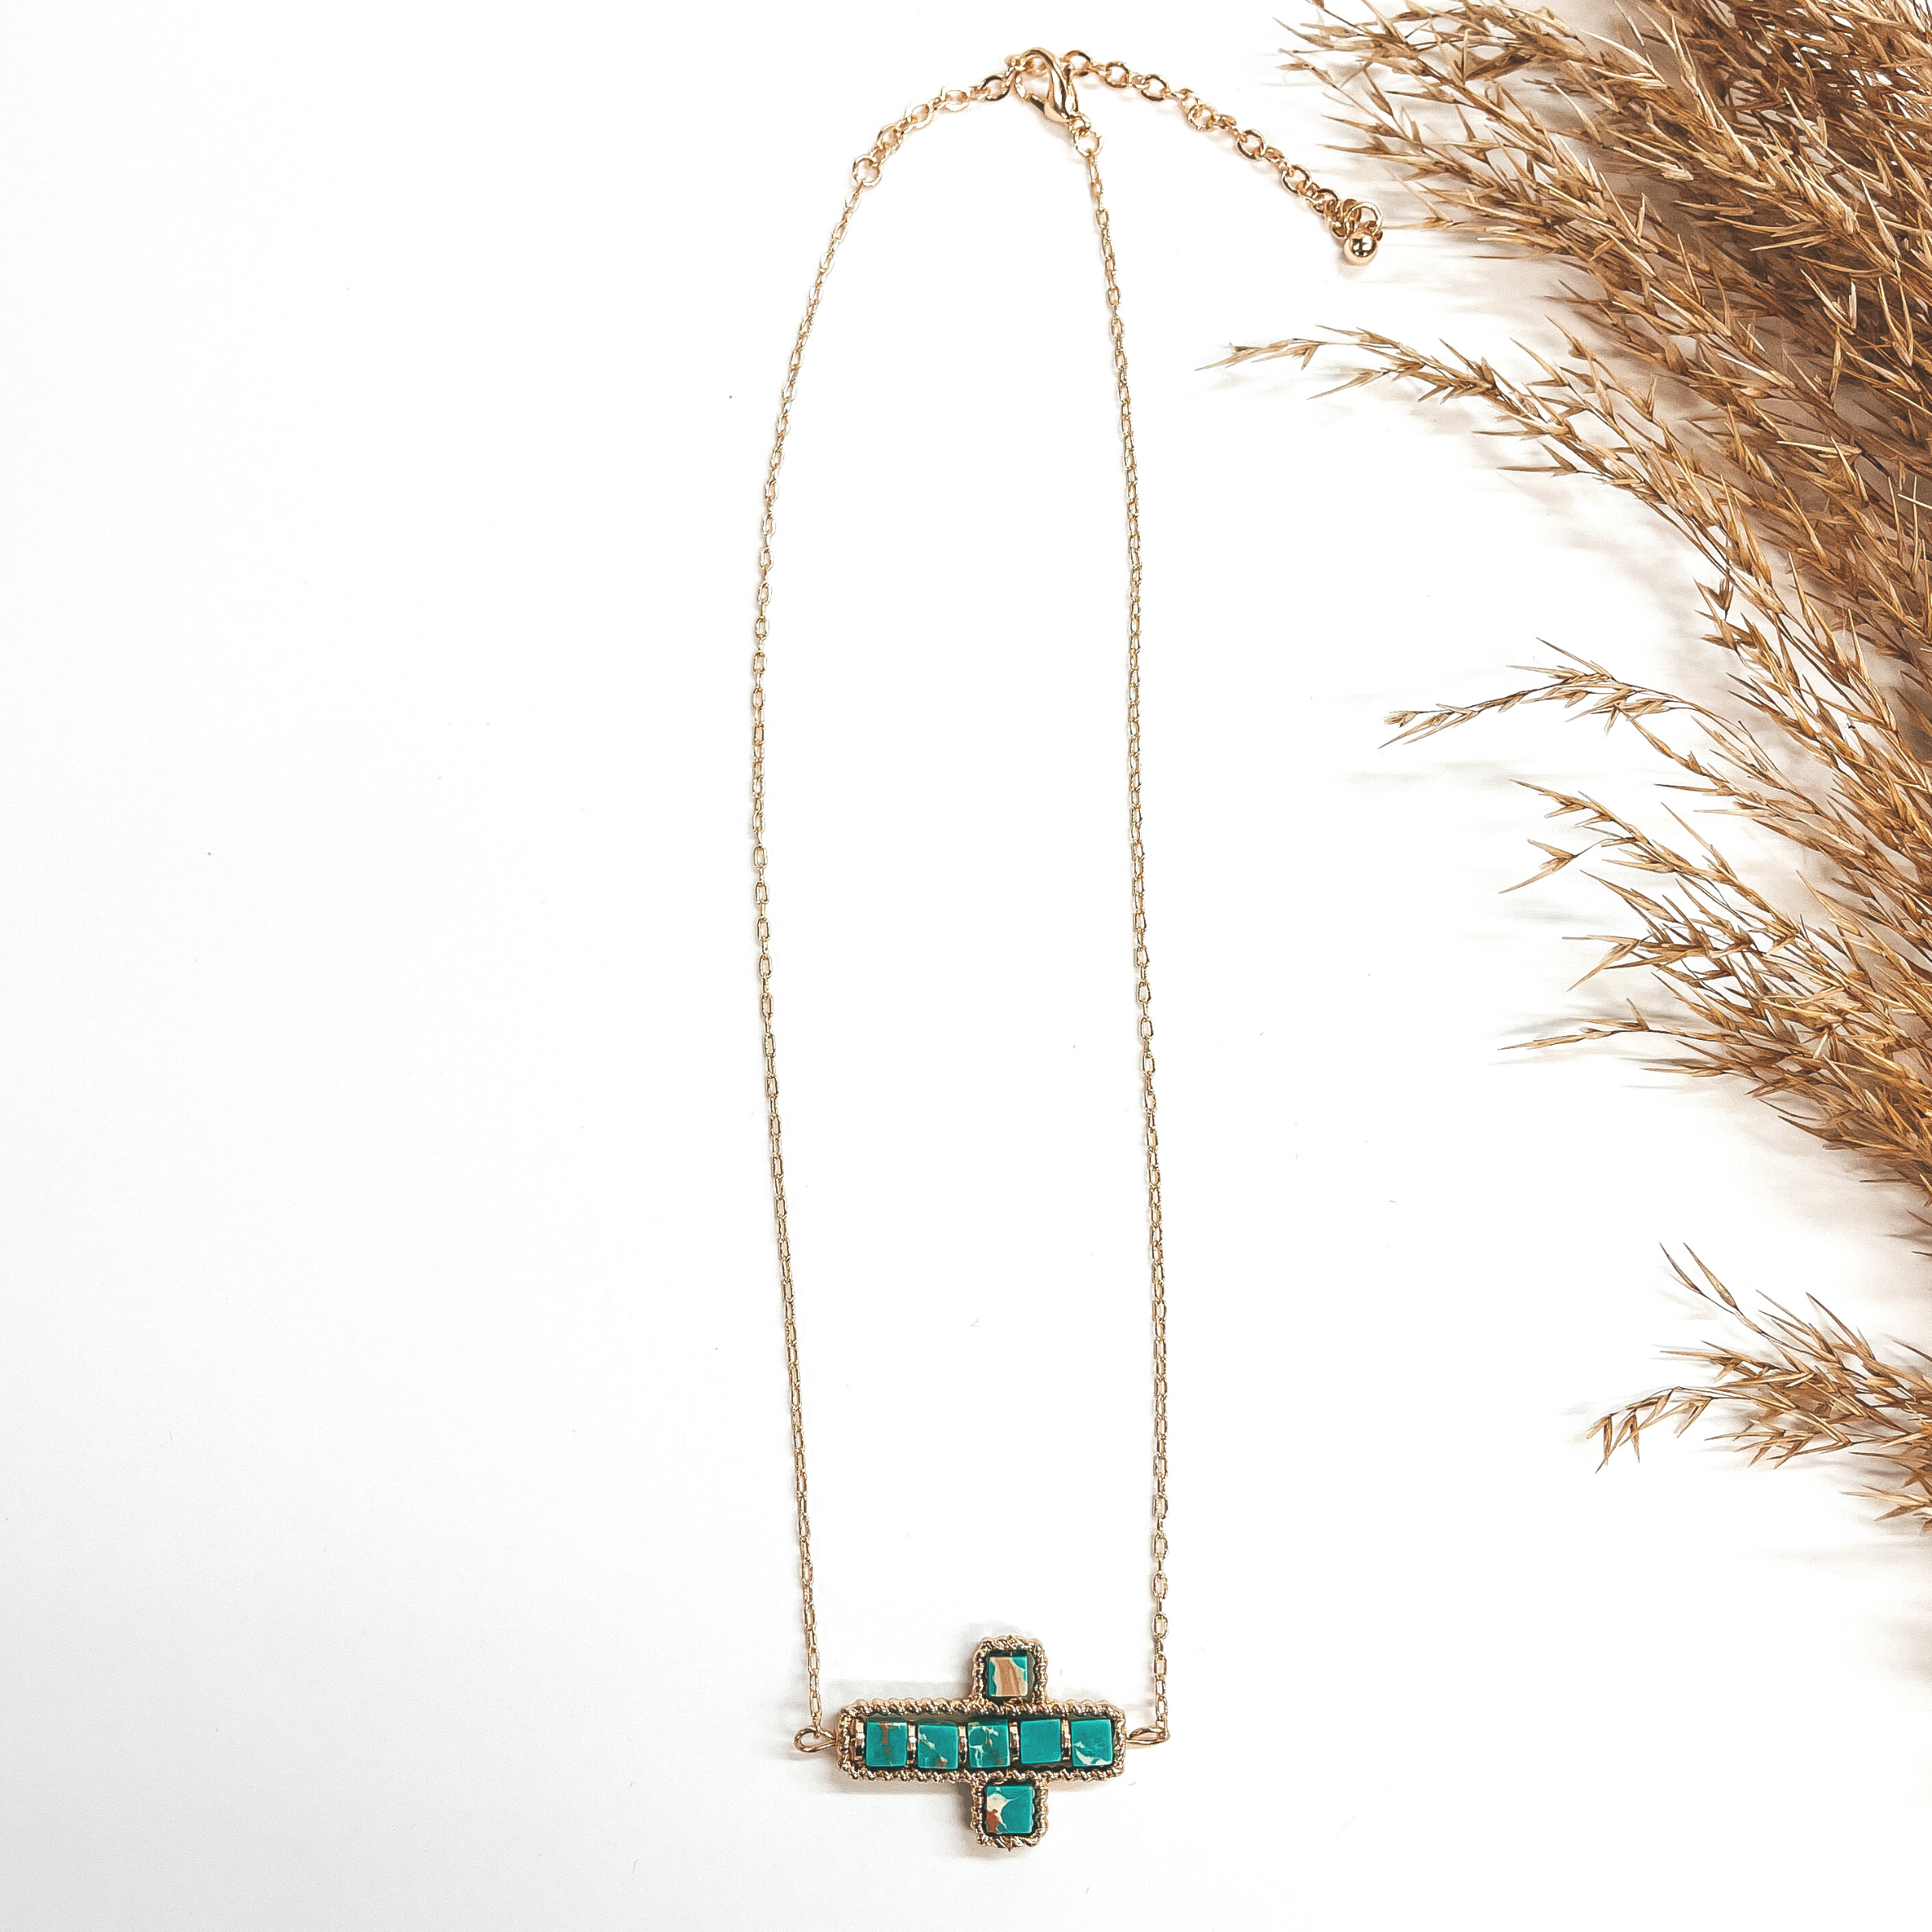 This a gold chain necklace with a cross pendant in  the center. The cross pendant has a gold rope  texture around and has semi- precious stones in  turquoise. It is taken on a white background and a  brown plant in the side as decor.